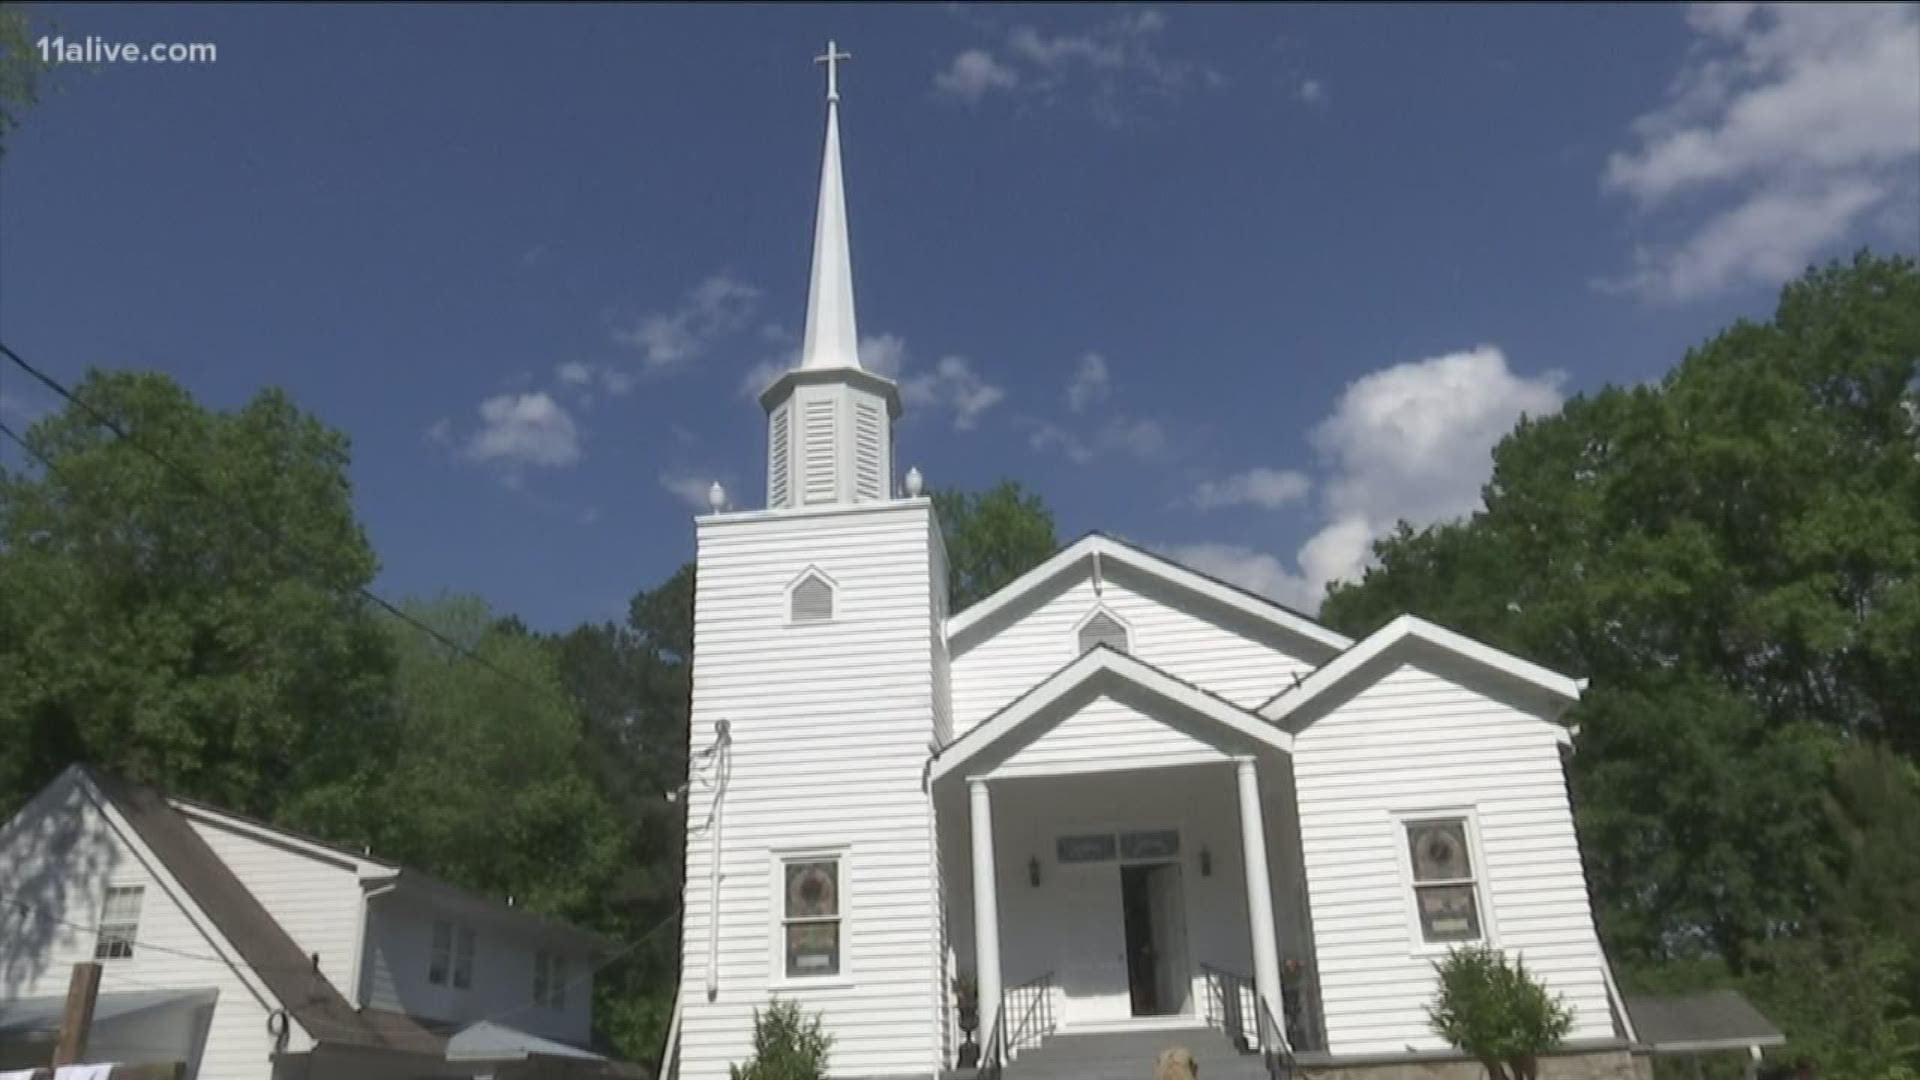 New Hope AME celebrated during a special Sunday service. The church dates back to 1869.